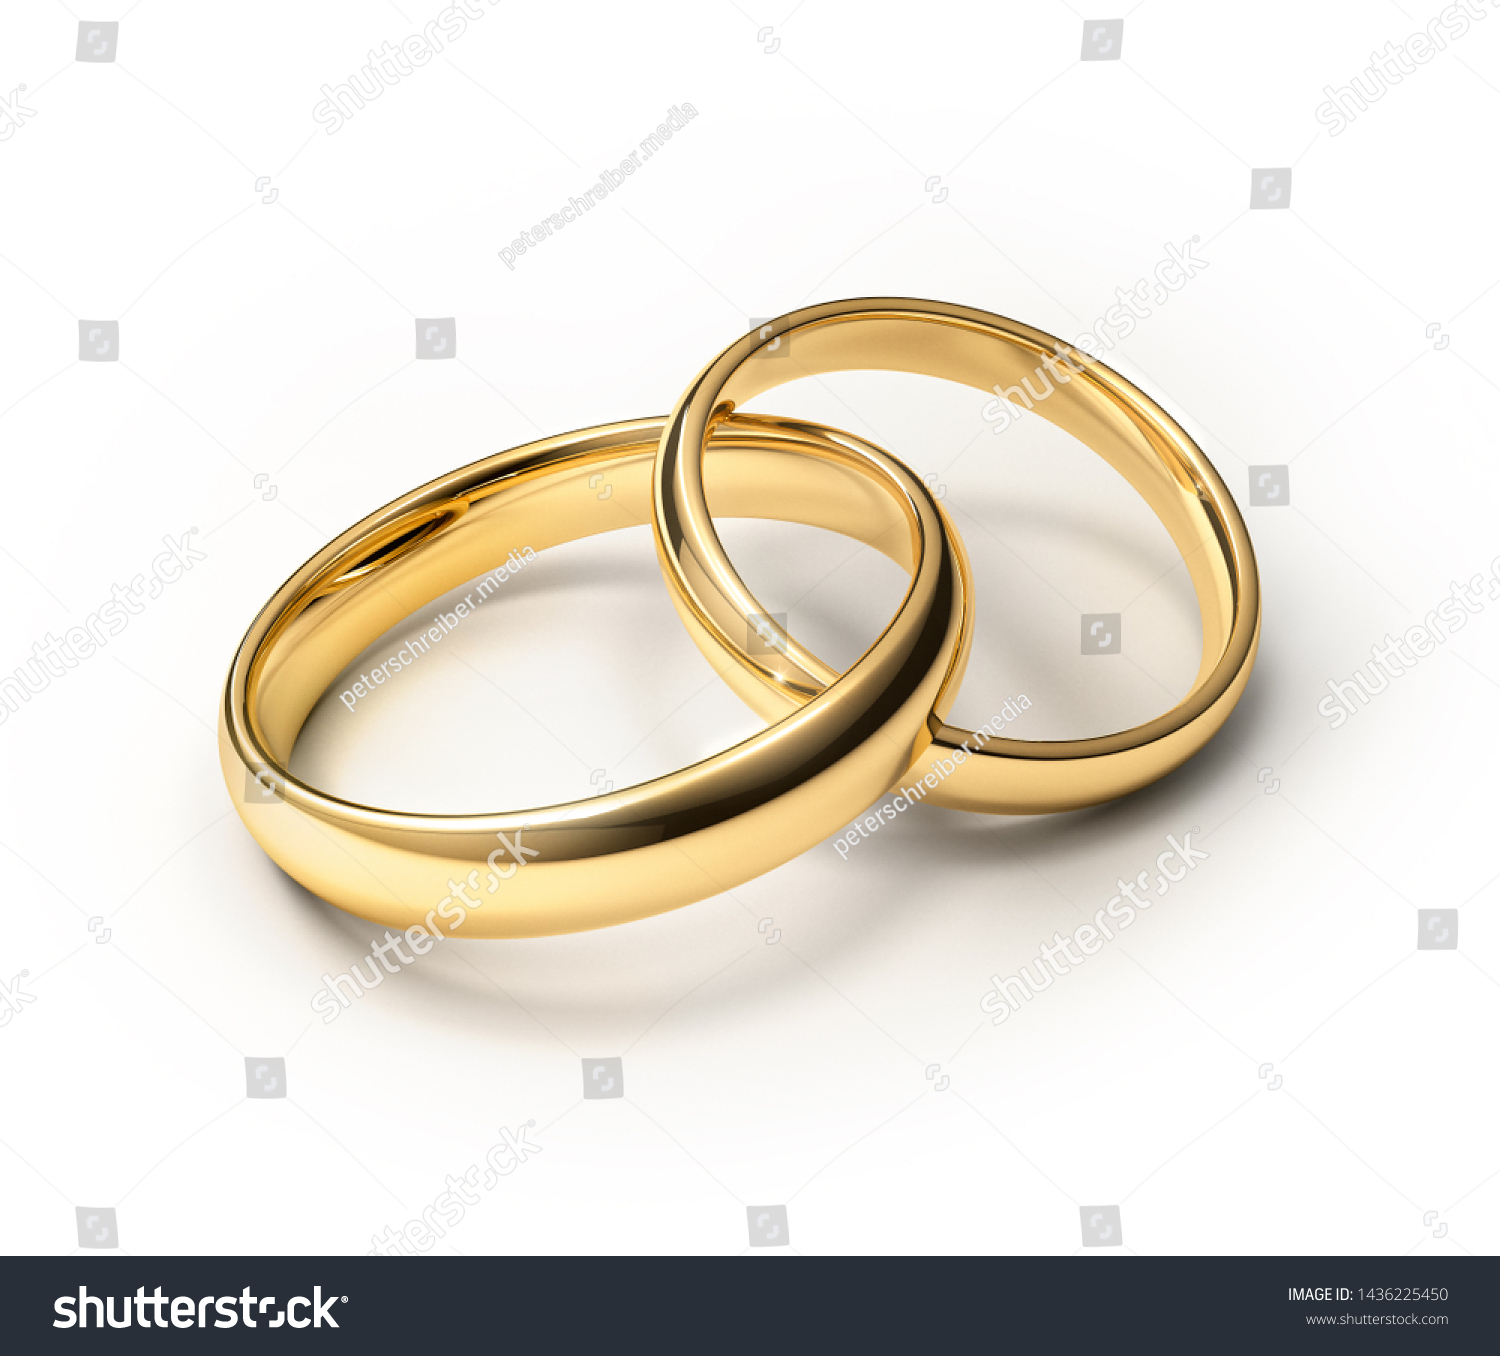 Connected Wedding Rings Isolated On White Stock Illustration 1436225450 ...